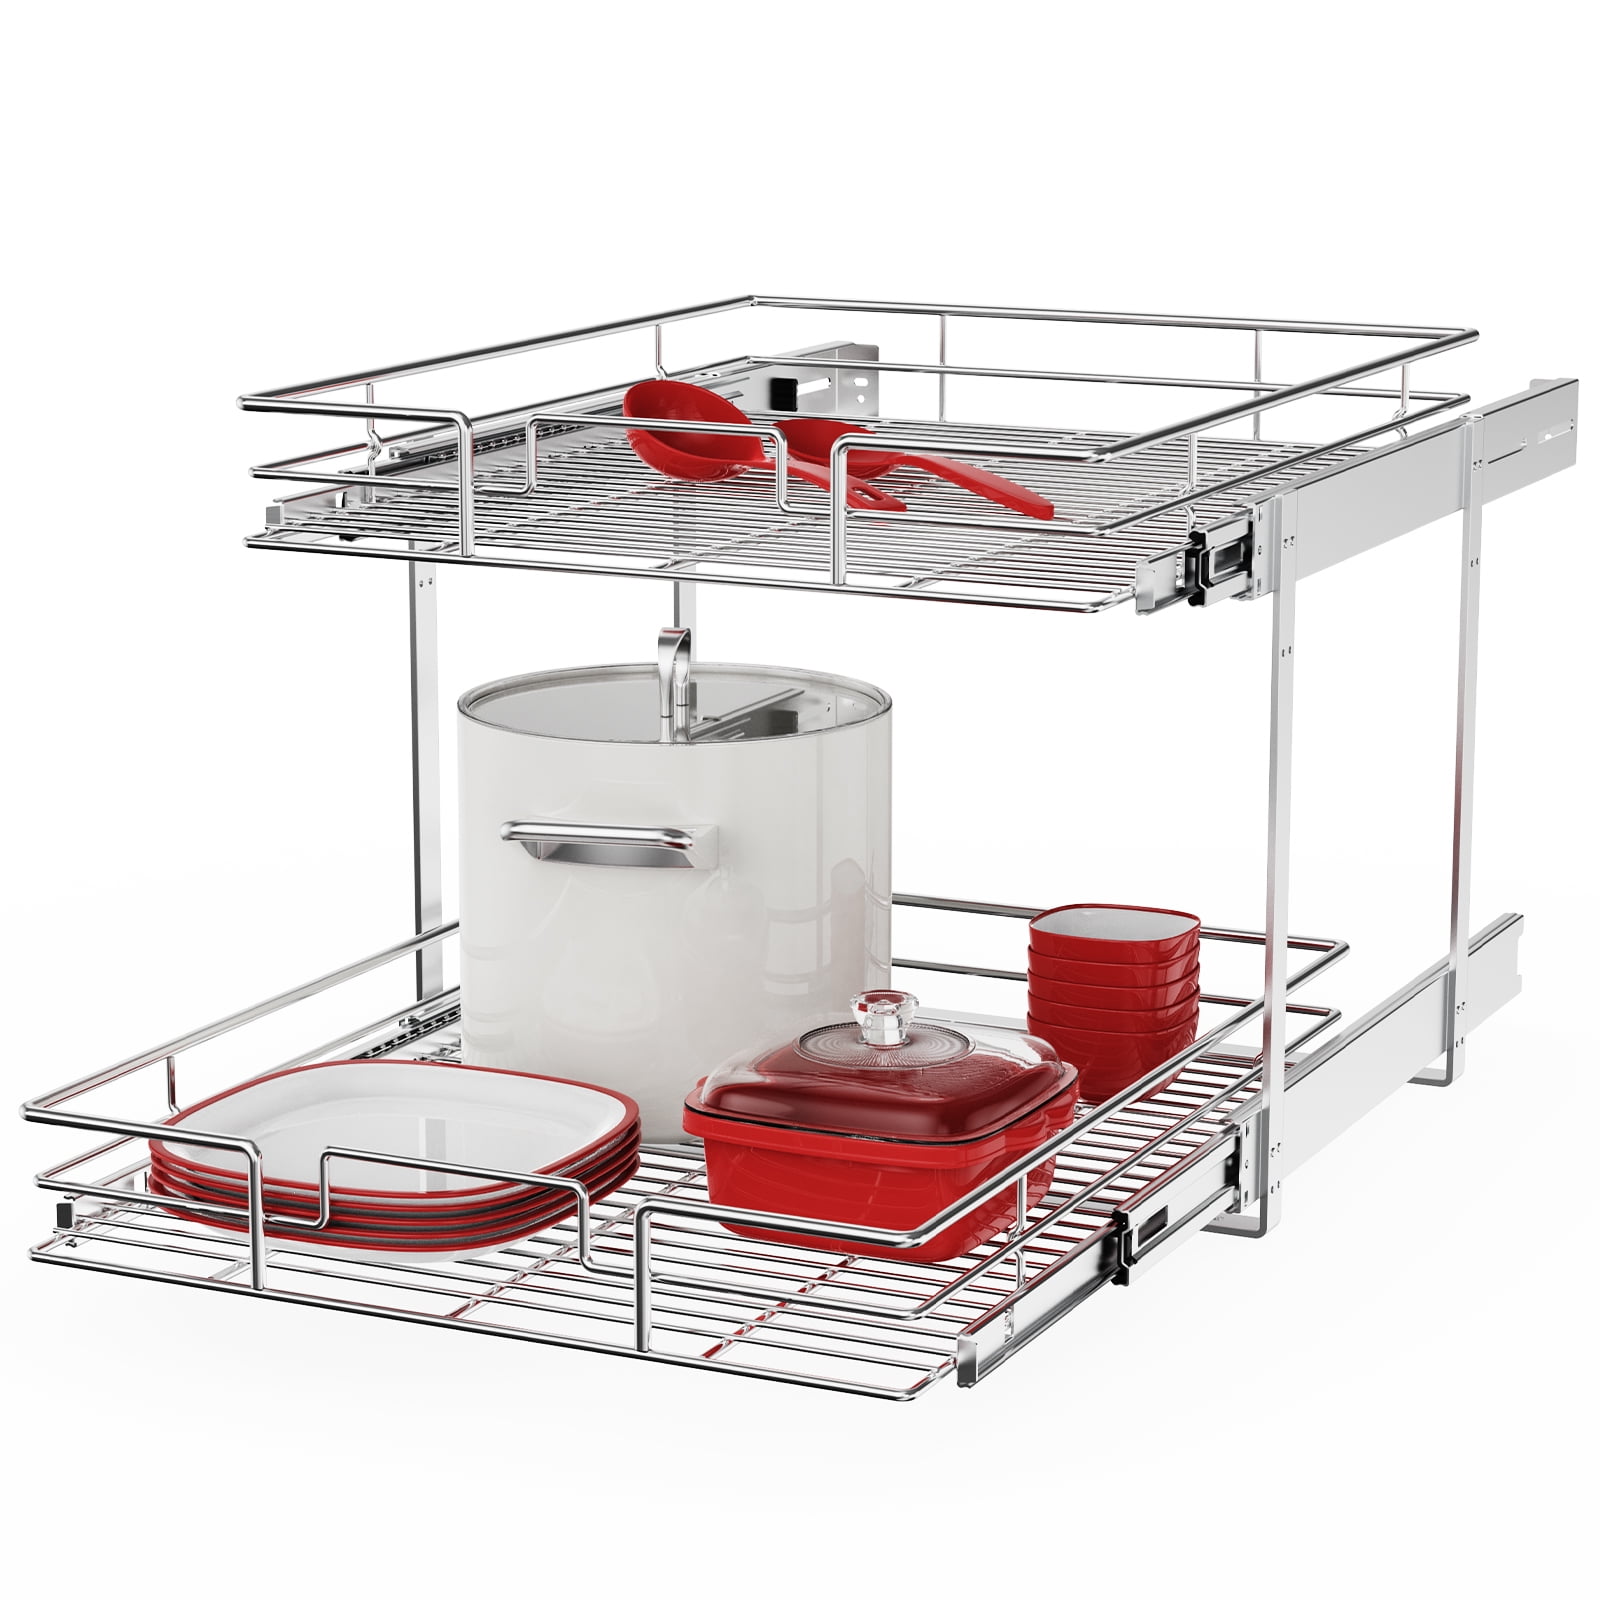 Amazer Pull Out Cabinet Organizer, 2 Tier Pull Out Drawers for